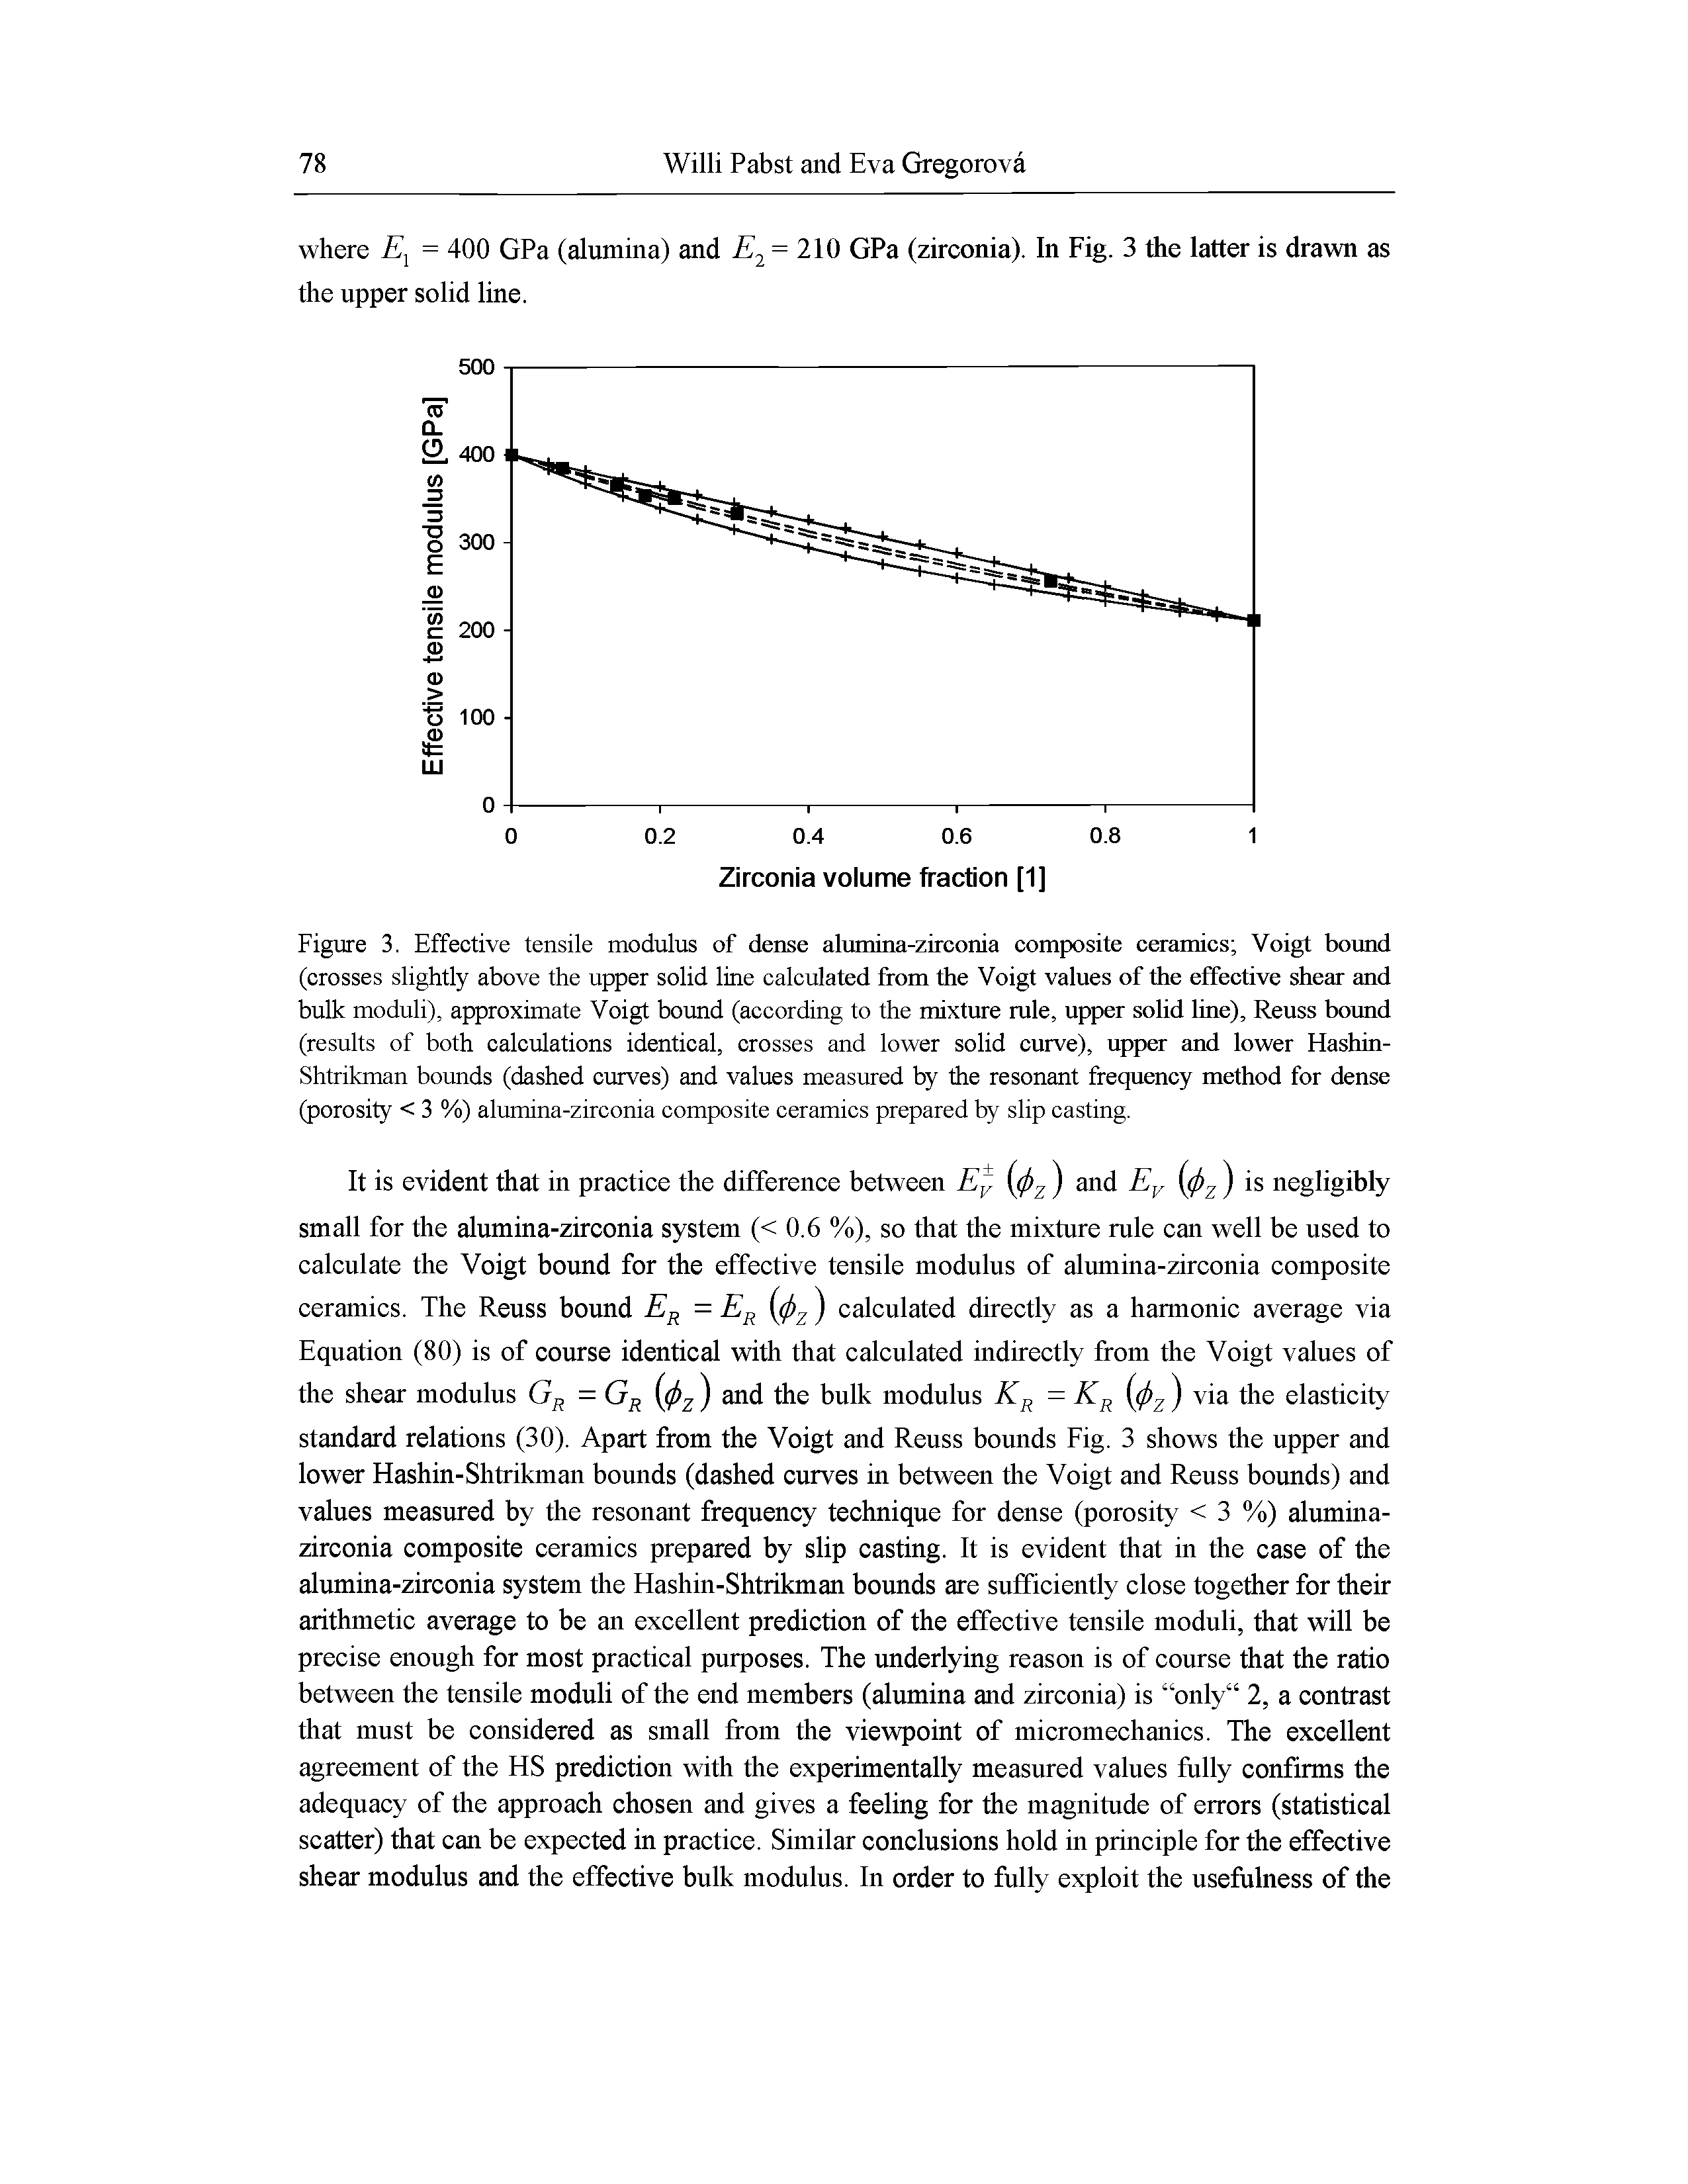 Figure 3. Effective tensile modulus of dense alumina-zirconia composite ceramics Voigt bound (crosses slightly above the upper solid line calculated from the Voigt values of the effective shear and bulk moduli), approximate Voigt bound (according to the mixture rule, upper solid line), Reuss boimd (results of both calculations identical, crosses and lower solid curve), upper and lower Hashin-Shtrikman bounds (dashed curves) and values measured by the resonant frequency method for dense (porosity < 3 %) alumina-zirconia composite ceramics prepared by slip casting.